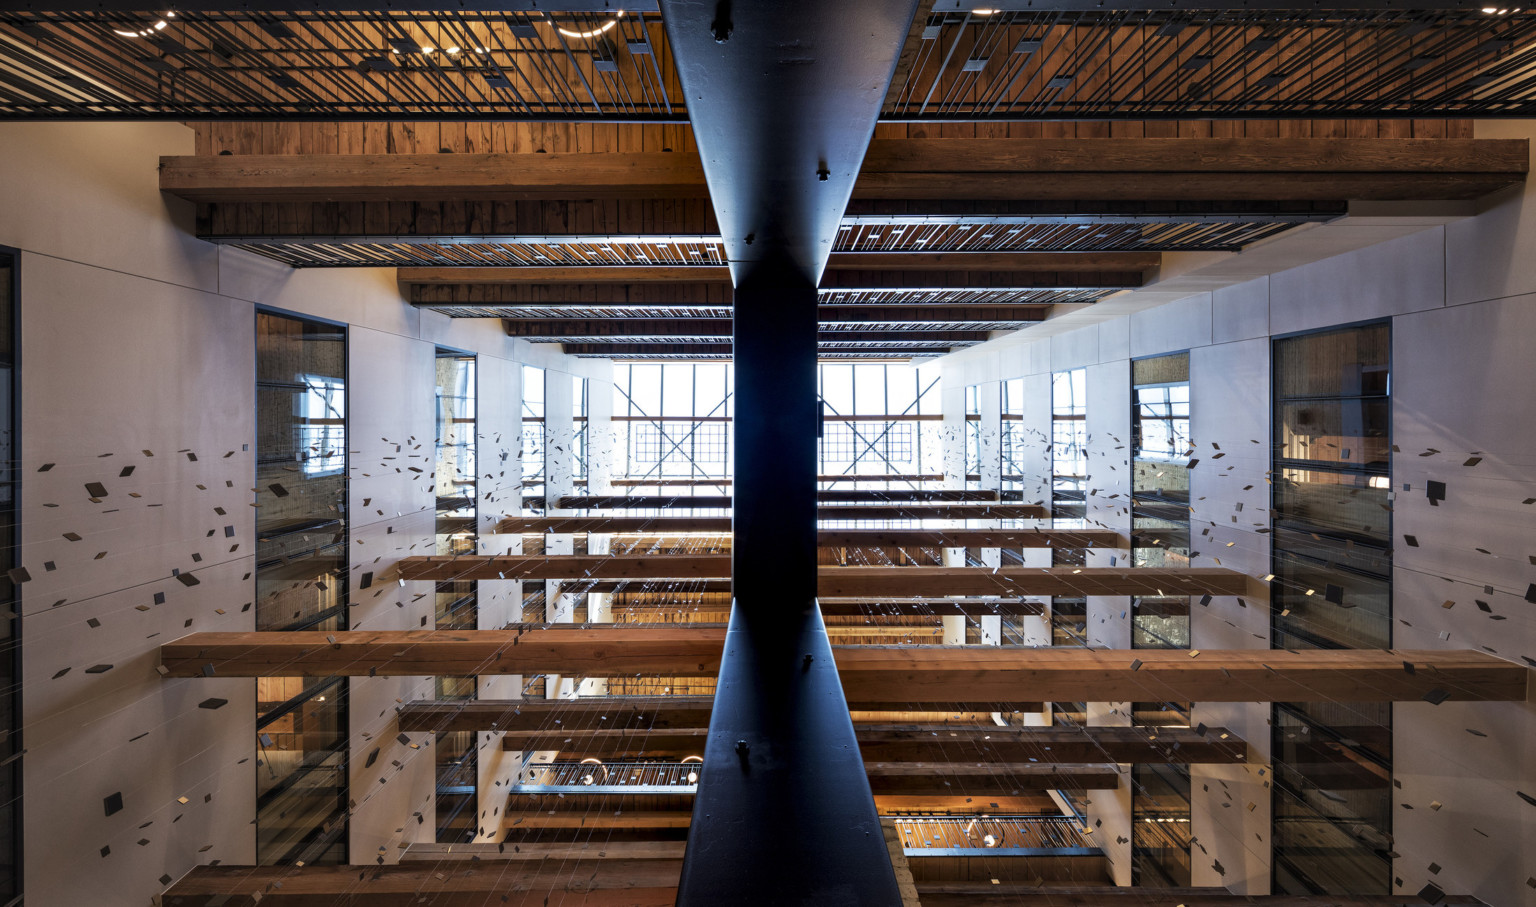 View of multistory atrium from above with walkways at each levels and wood beams between. Strung squares hang from grid above